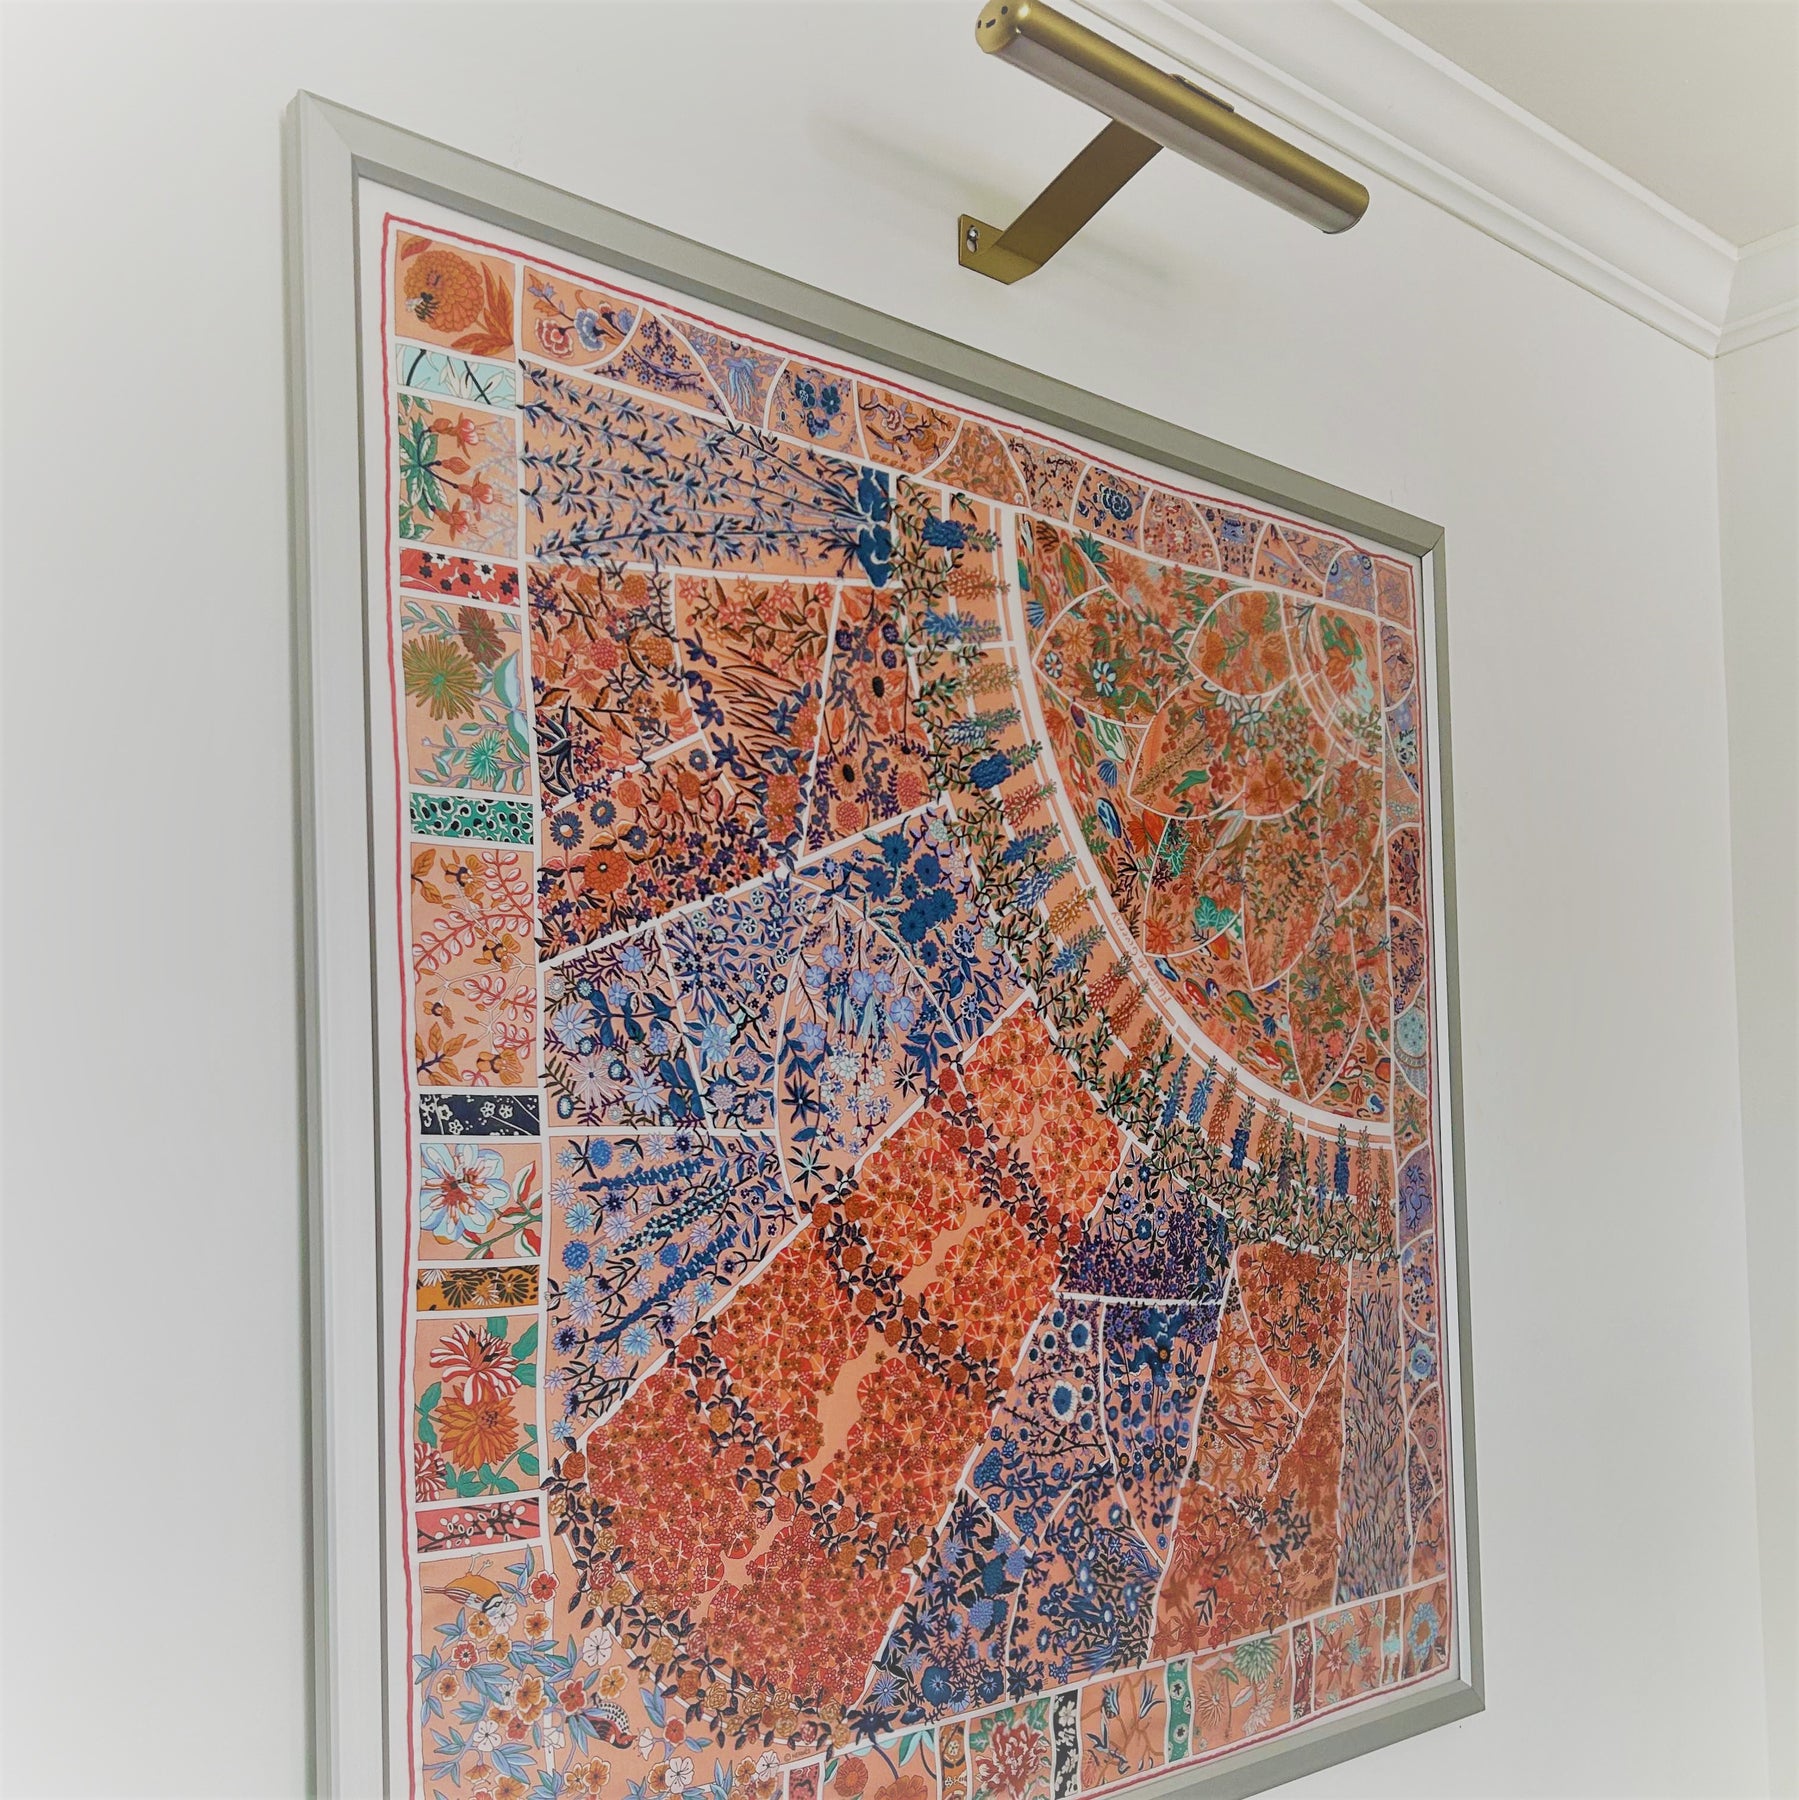 Framed Louis Vuitton World map Silk Scarf in 36 by 36 Shadowbox